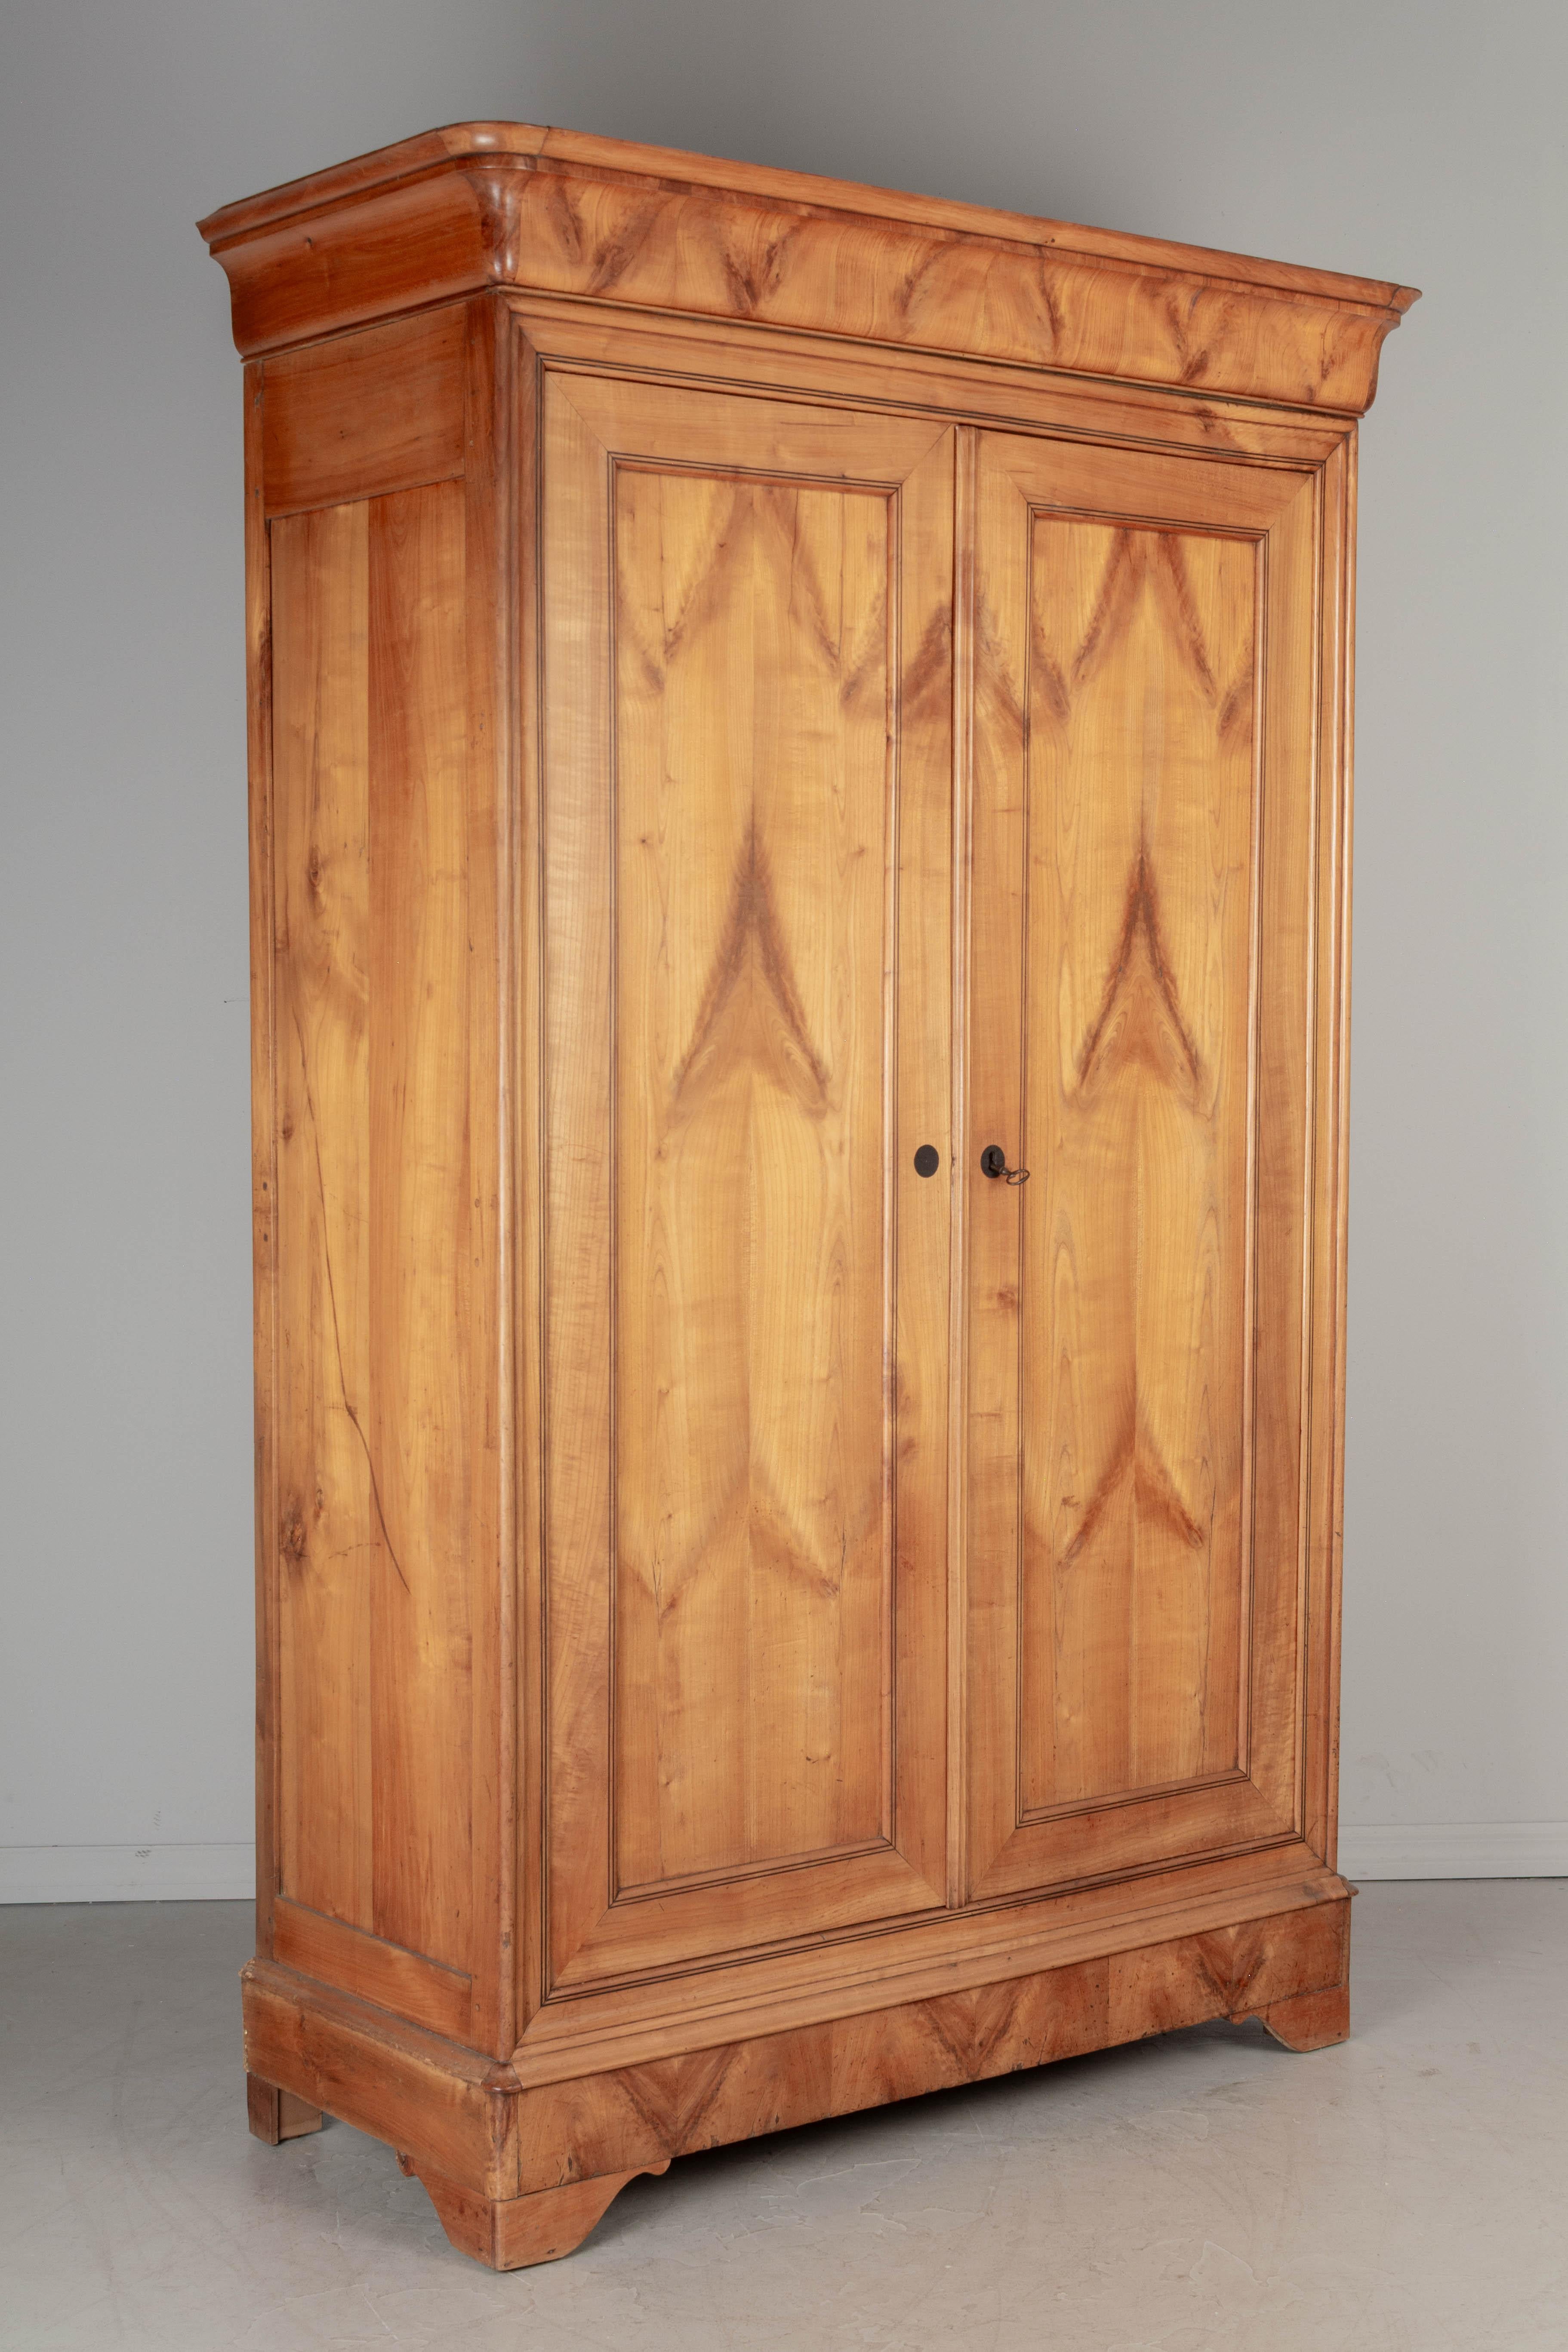 A 19th century French Louis Philippe armoire, or wardrobe, made of solid cherry with beautiful bookmatched wood grain pattern and fine linear inlay around the perimeter of the doors. Interior provides ample storage with two shelves. Working lock and